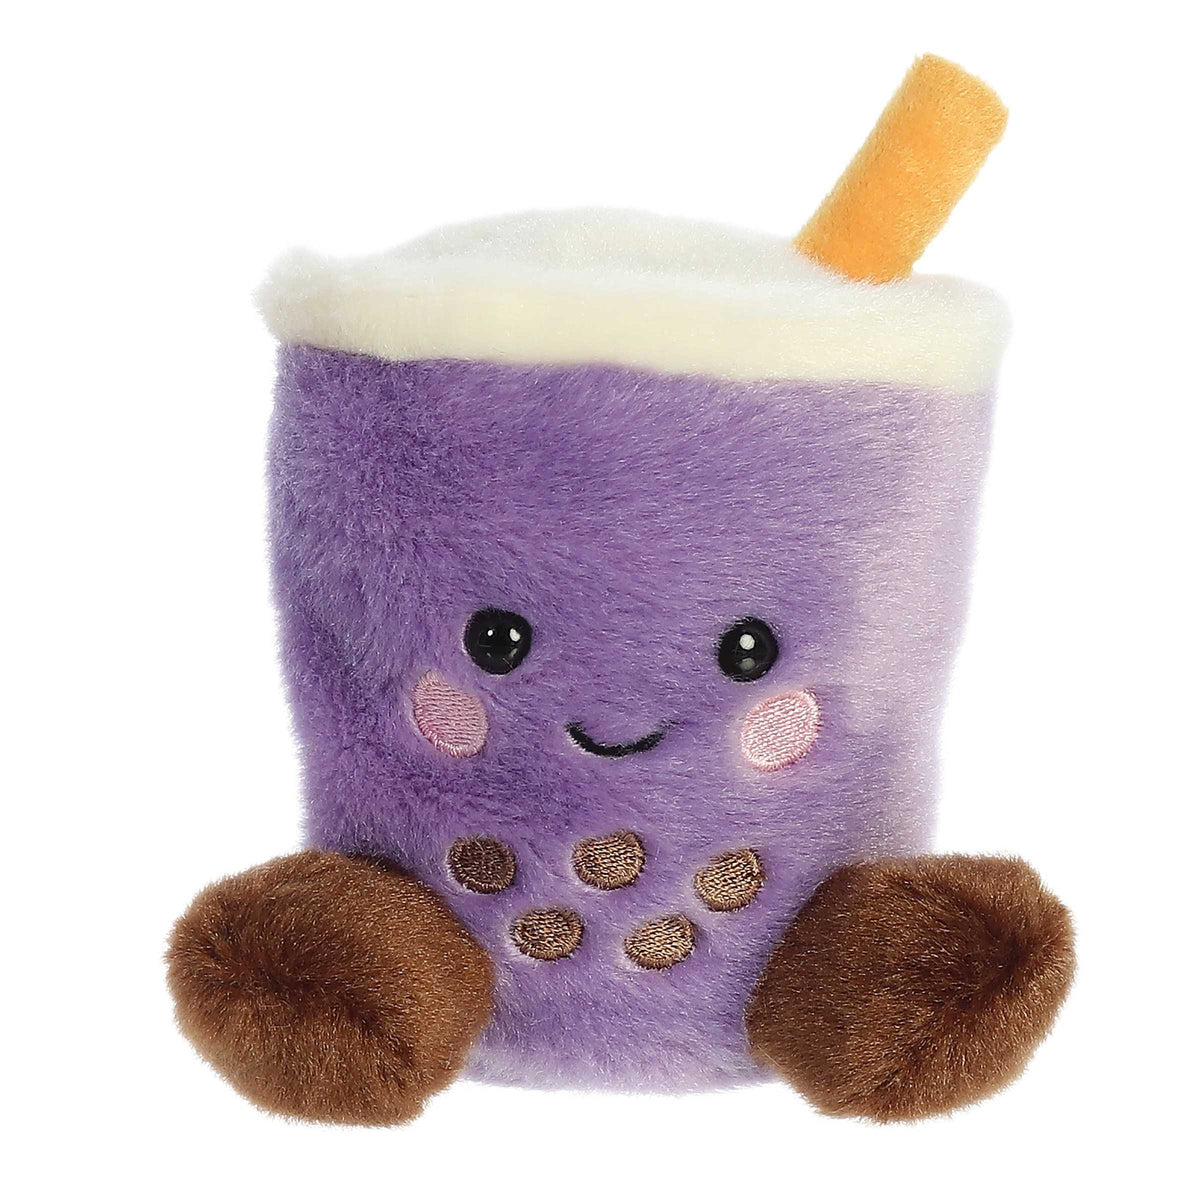 Tart Taro Boba charms with a fluffy purple exterior, with a frothy white finish and a cute boba straw!